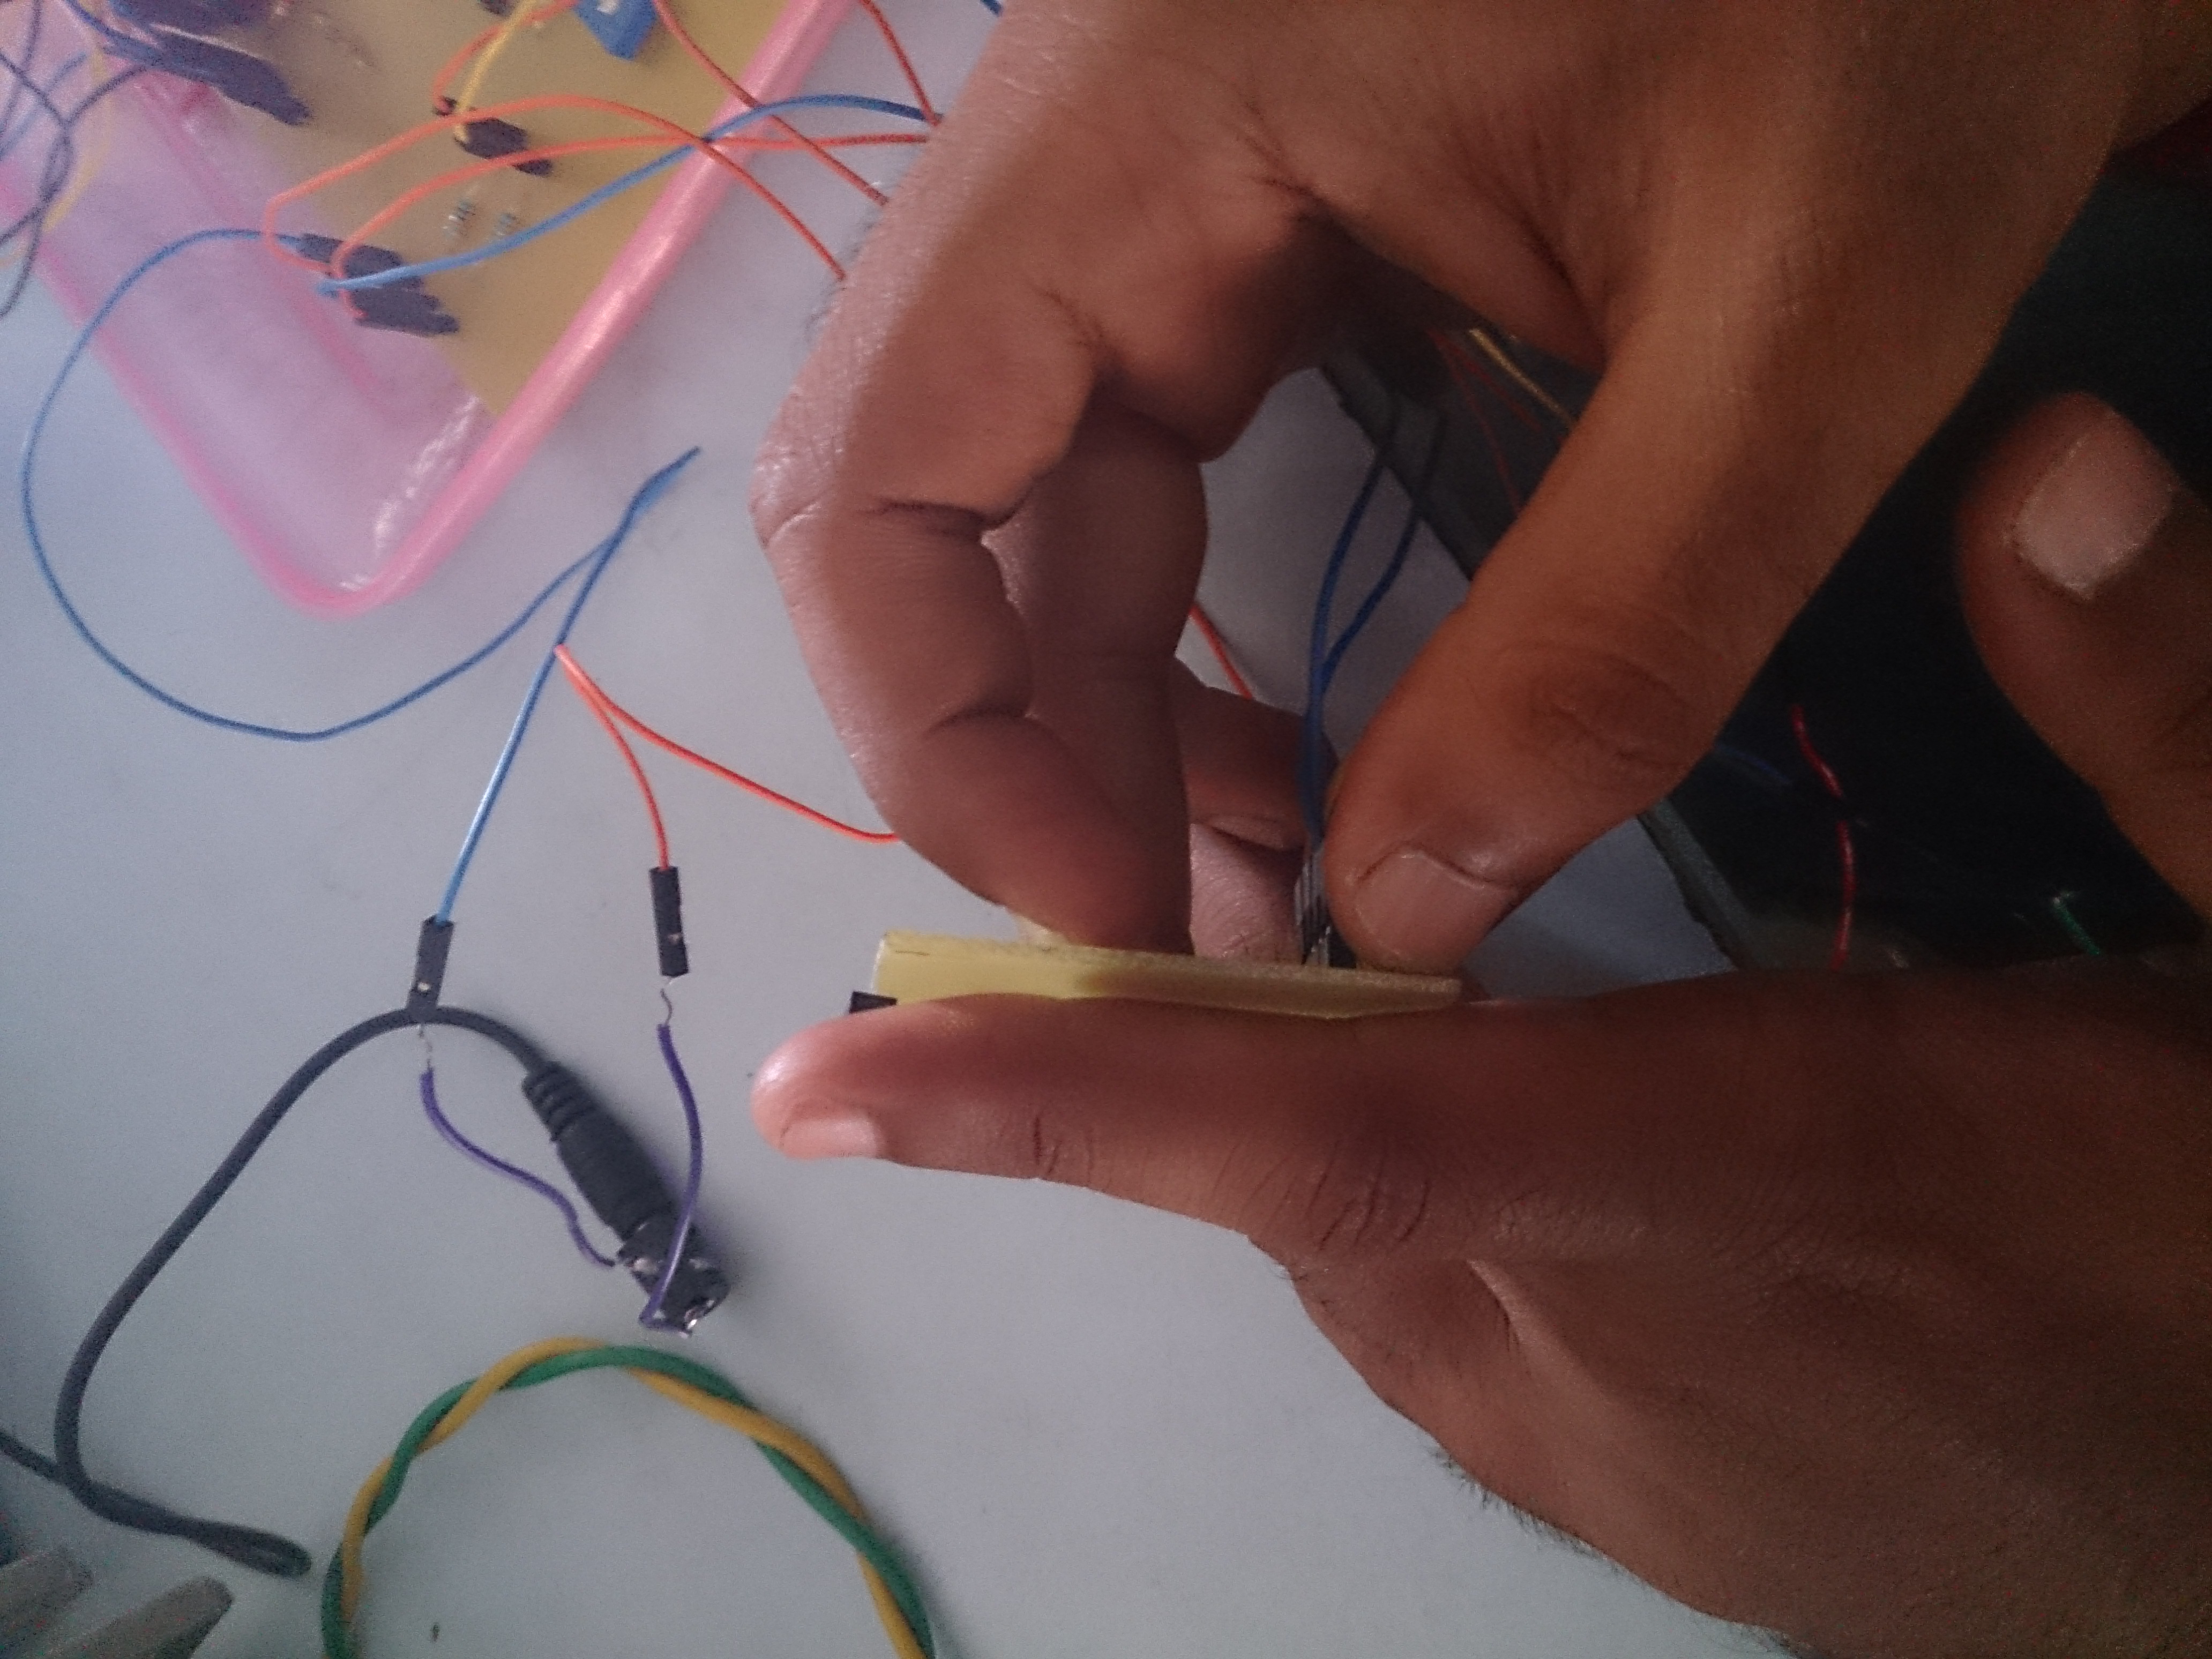 Our sensor placed in fore-finger tip.